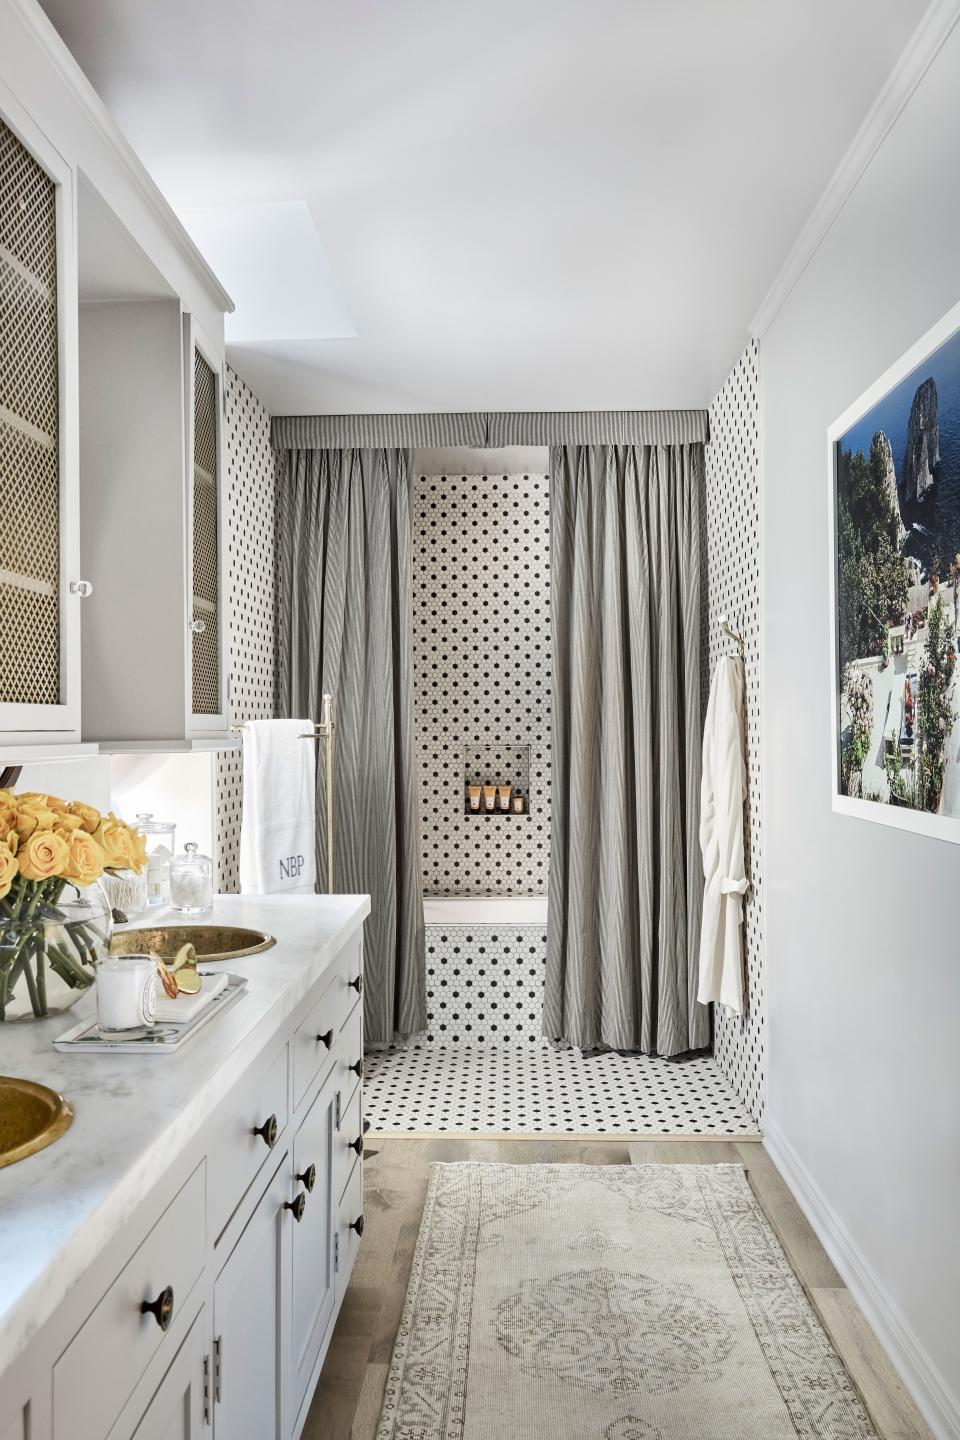 The curtains draping the bathtub are a “charming” feature original to the house, says Roxy, adding that two loveseats in the bathroom make for a “sweet moment.”